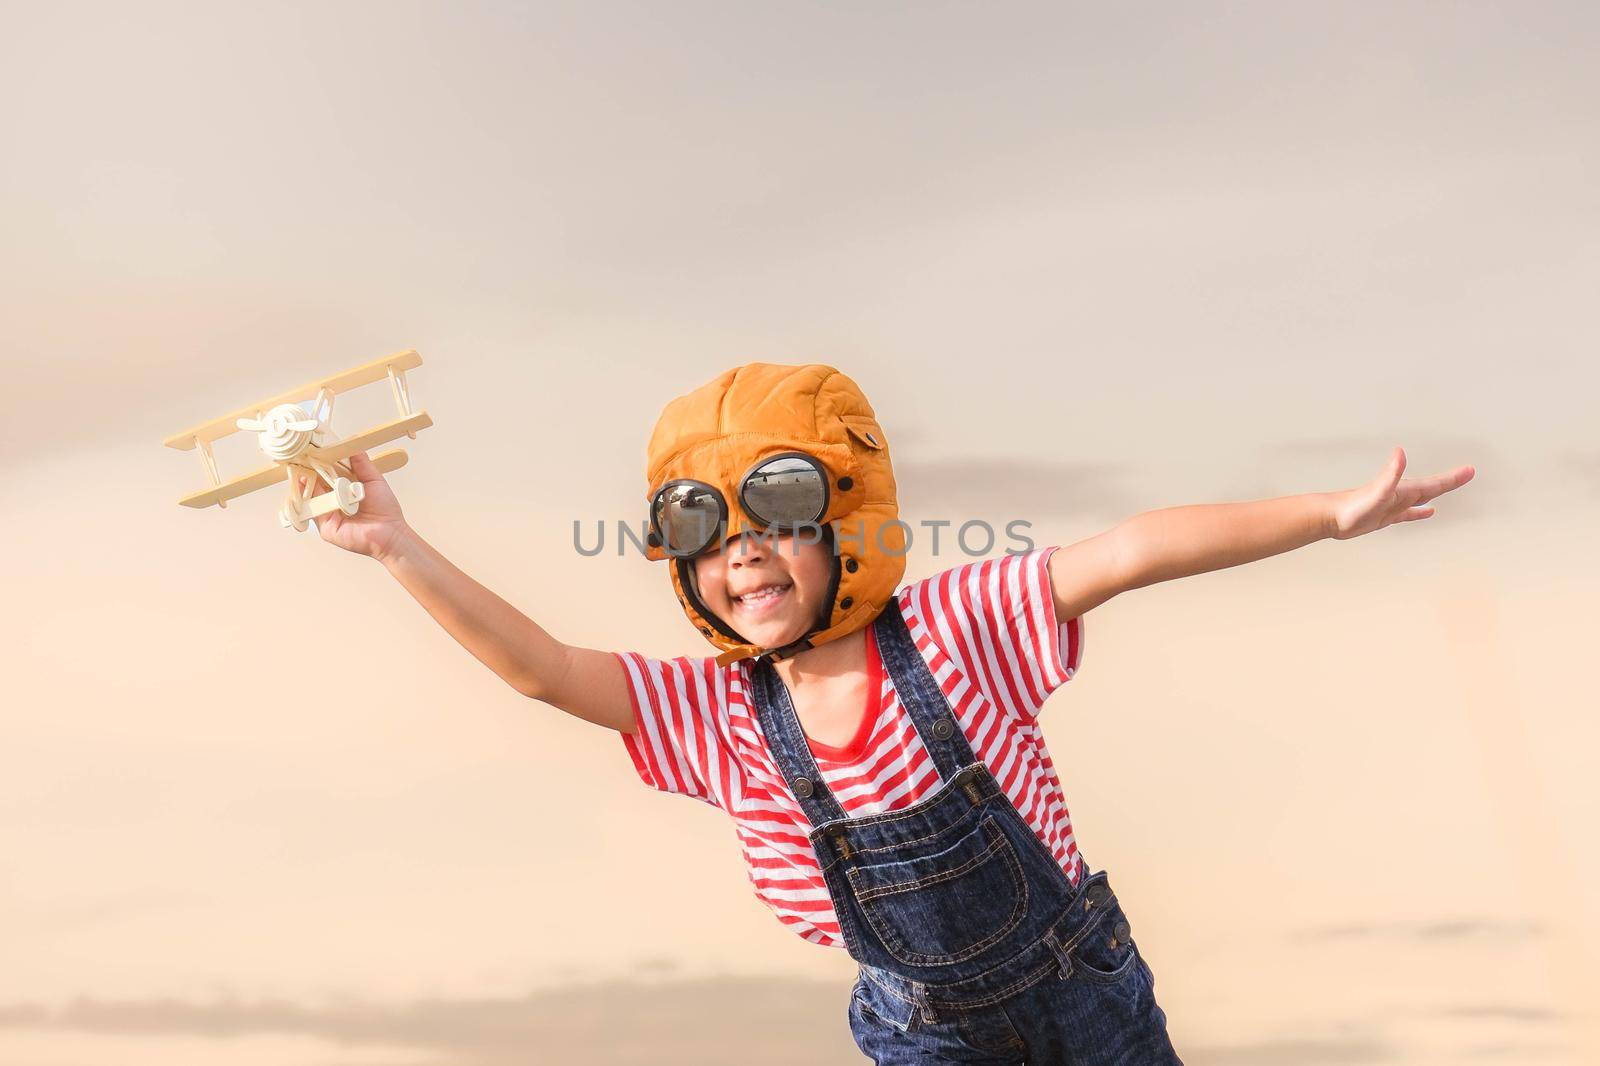 Cute little girl playing with toy plane against pastel sky background. Happy kid in pilot hat playing with toy plane in summer park. Childhood dream imagination concept.